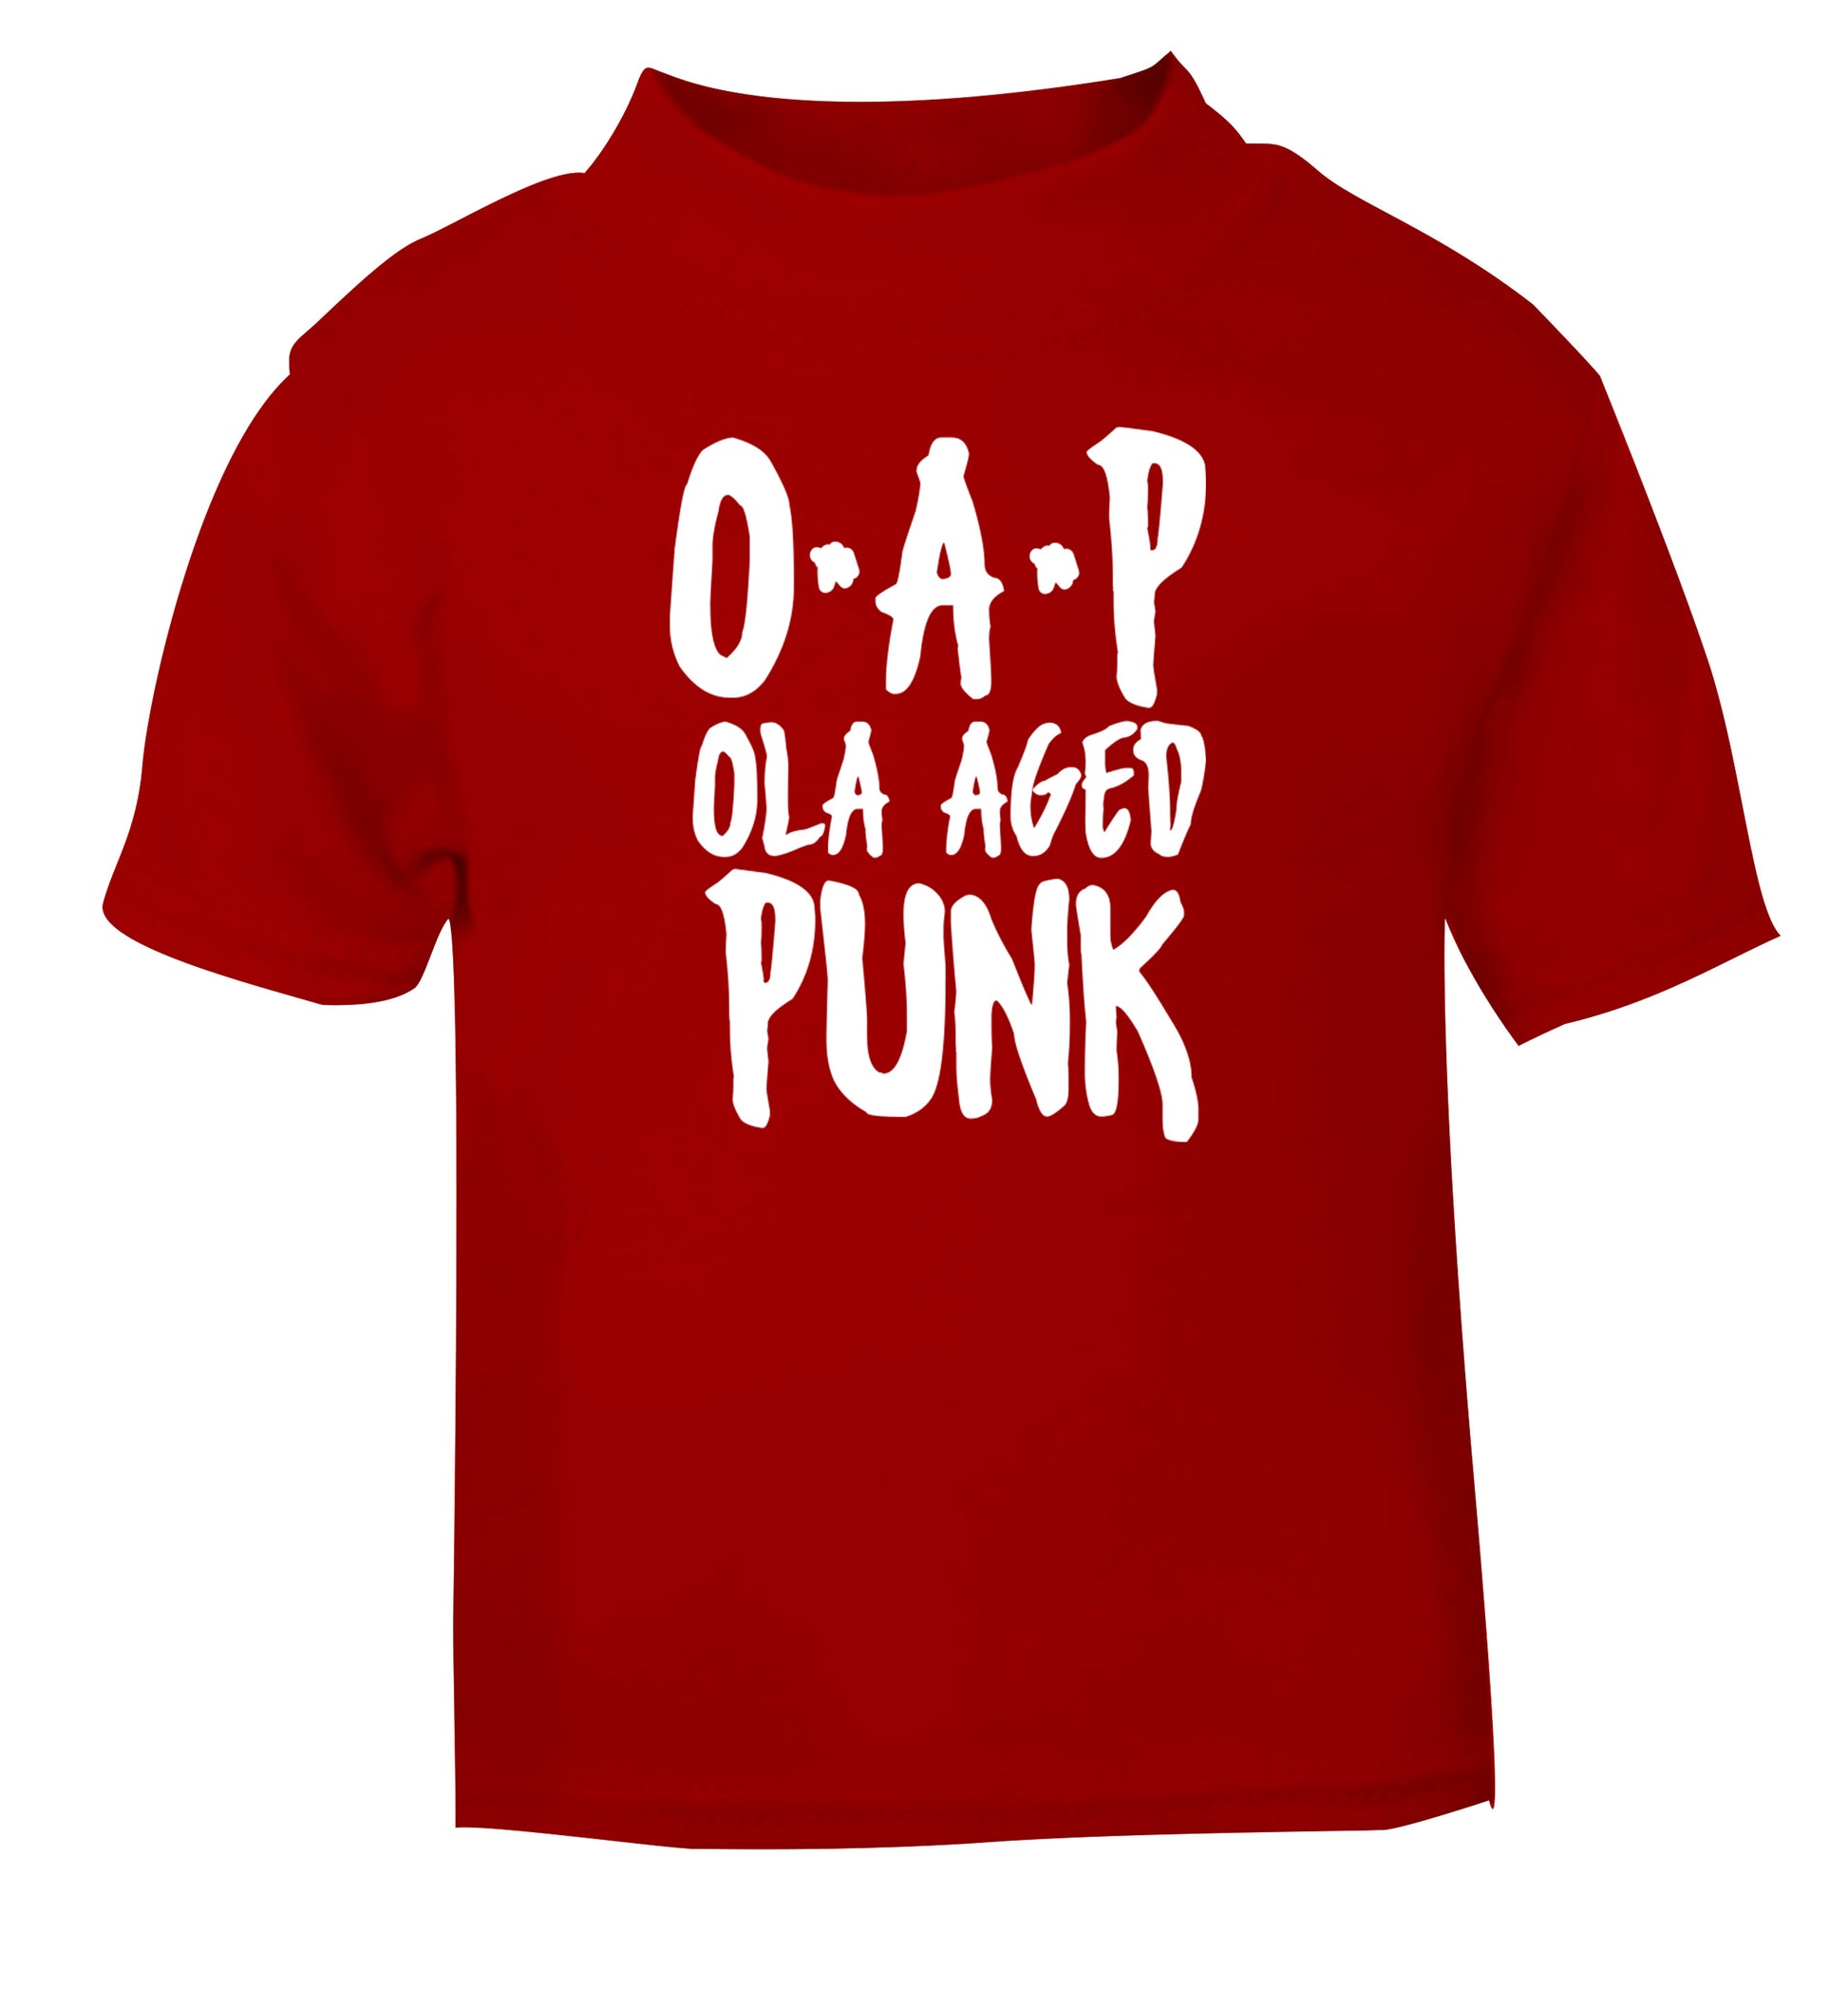 O.A.P Old Aged Punk red Baby Toddler Tshirt 2 Years